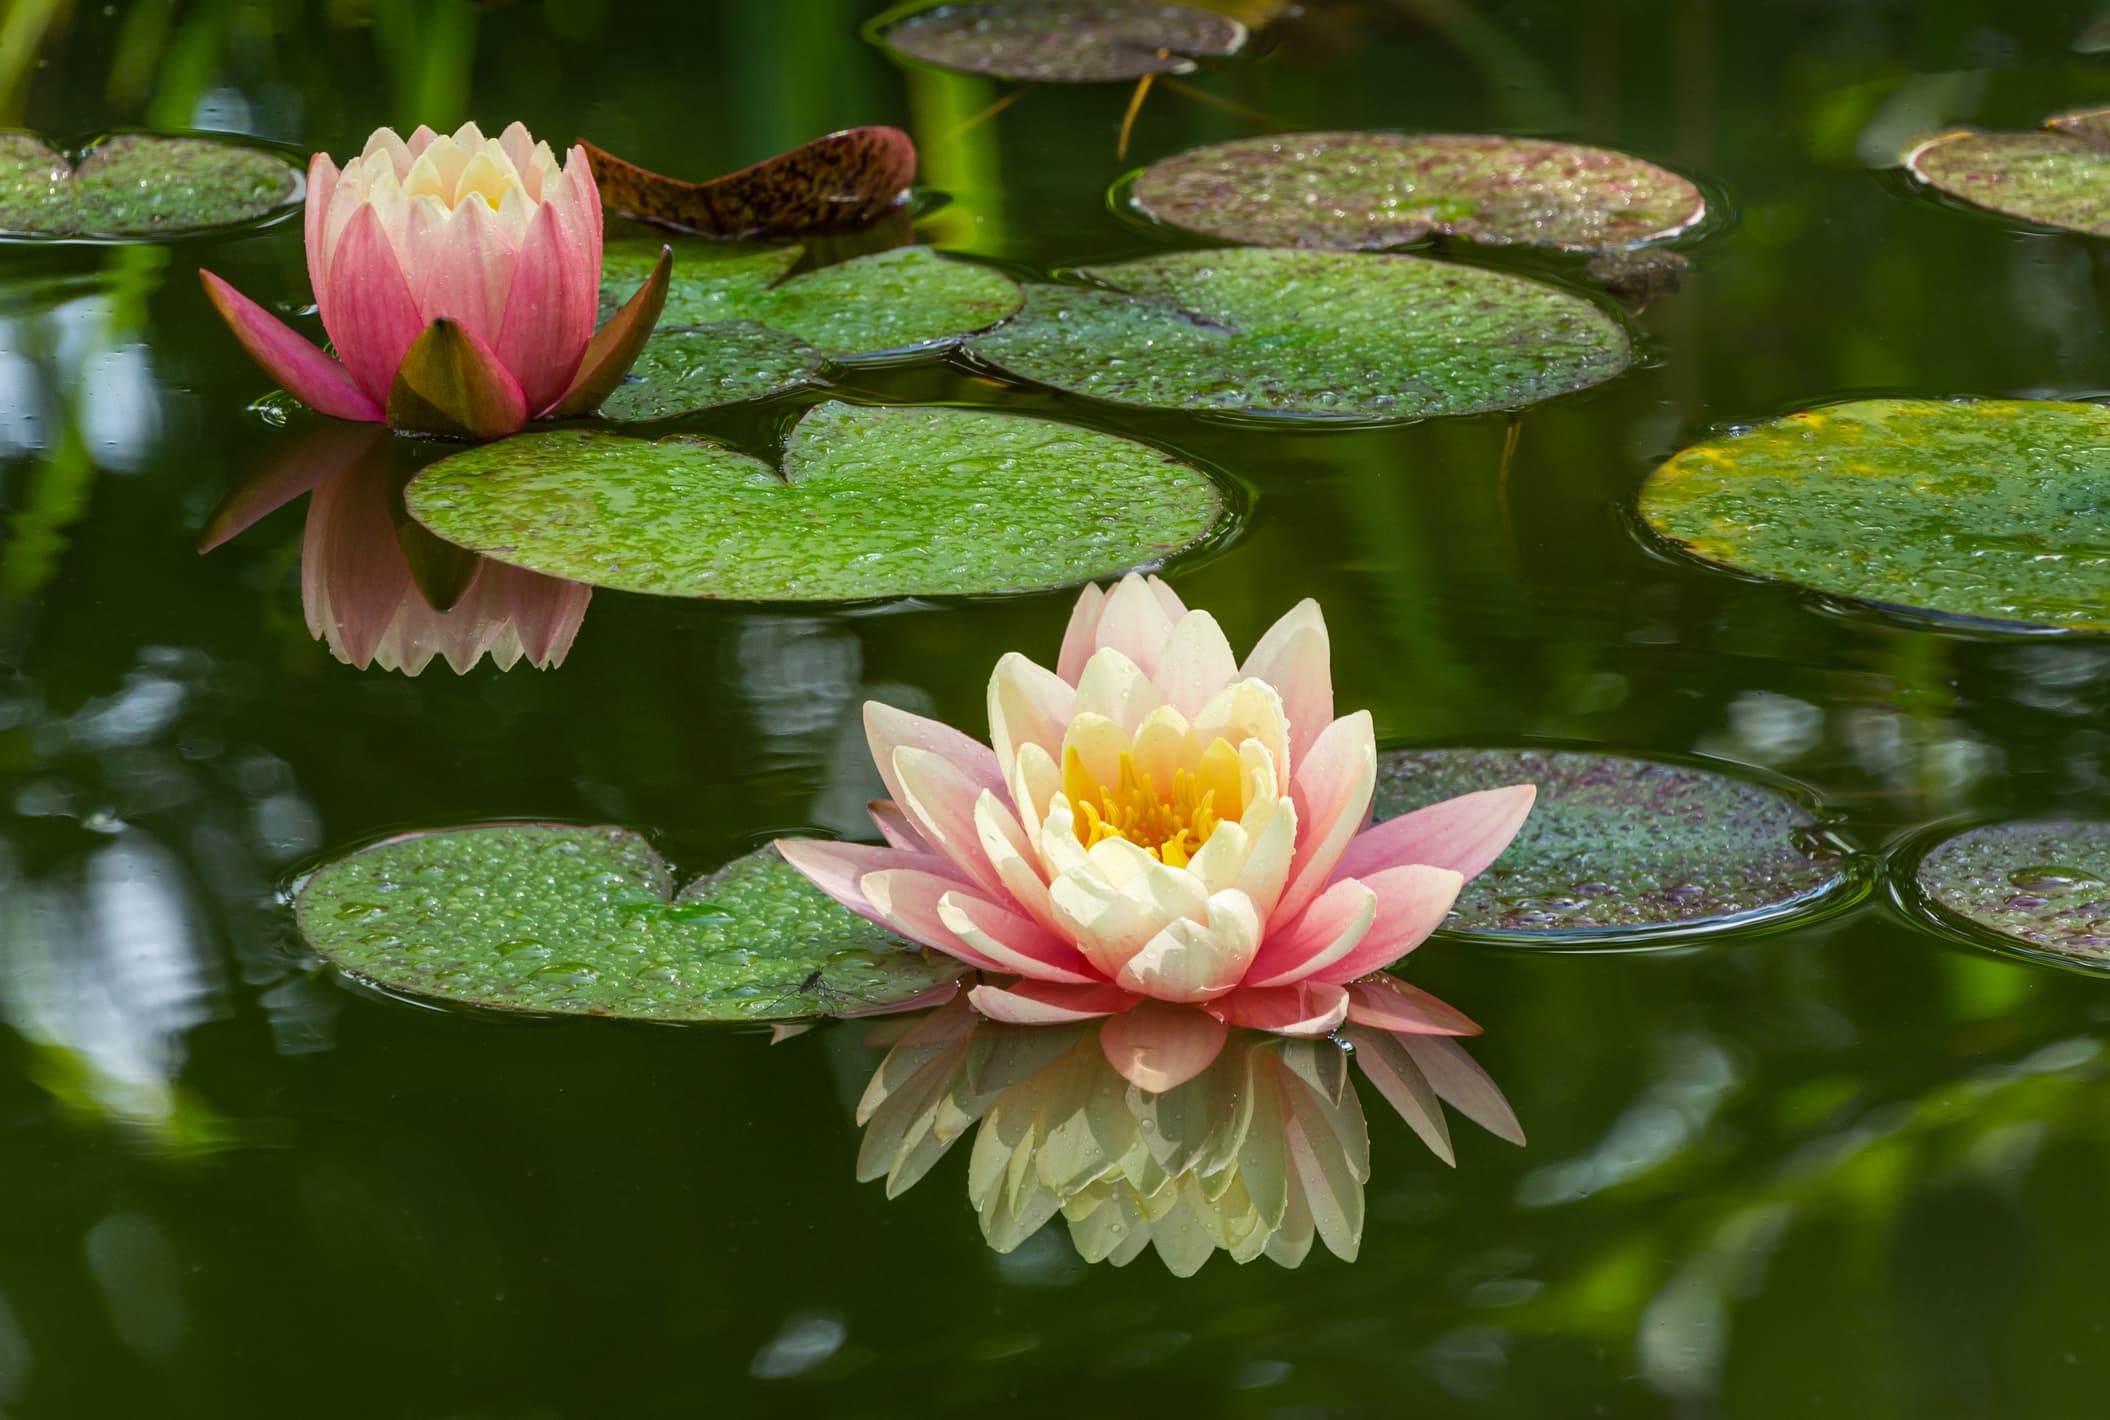 Two pink water lily or lotus flower Perry's Orange Sunset in garden pond.